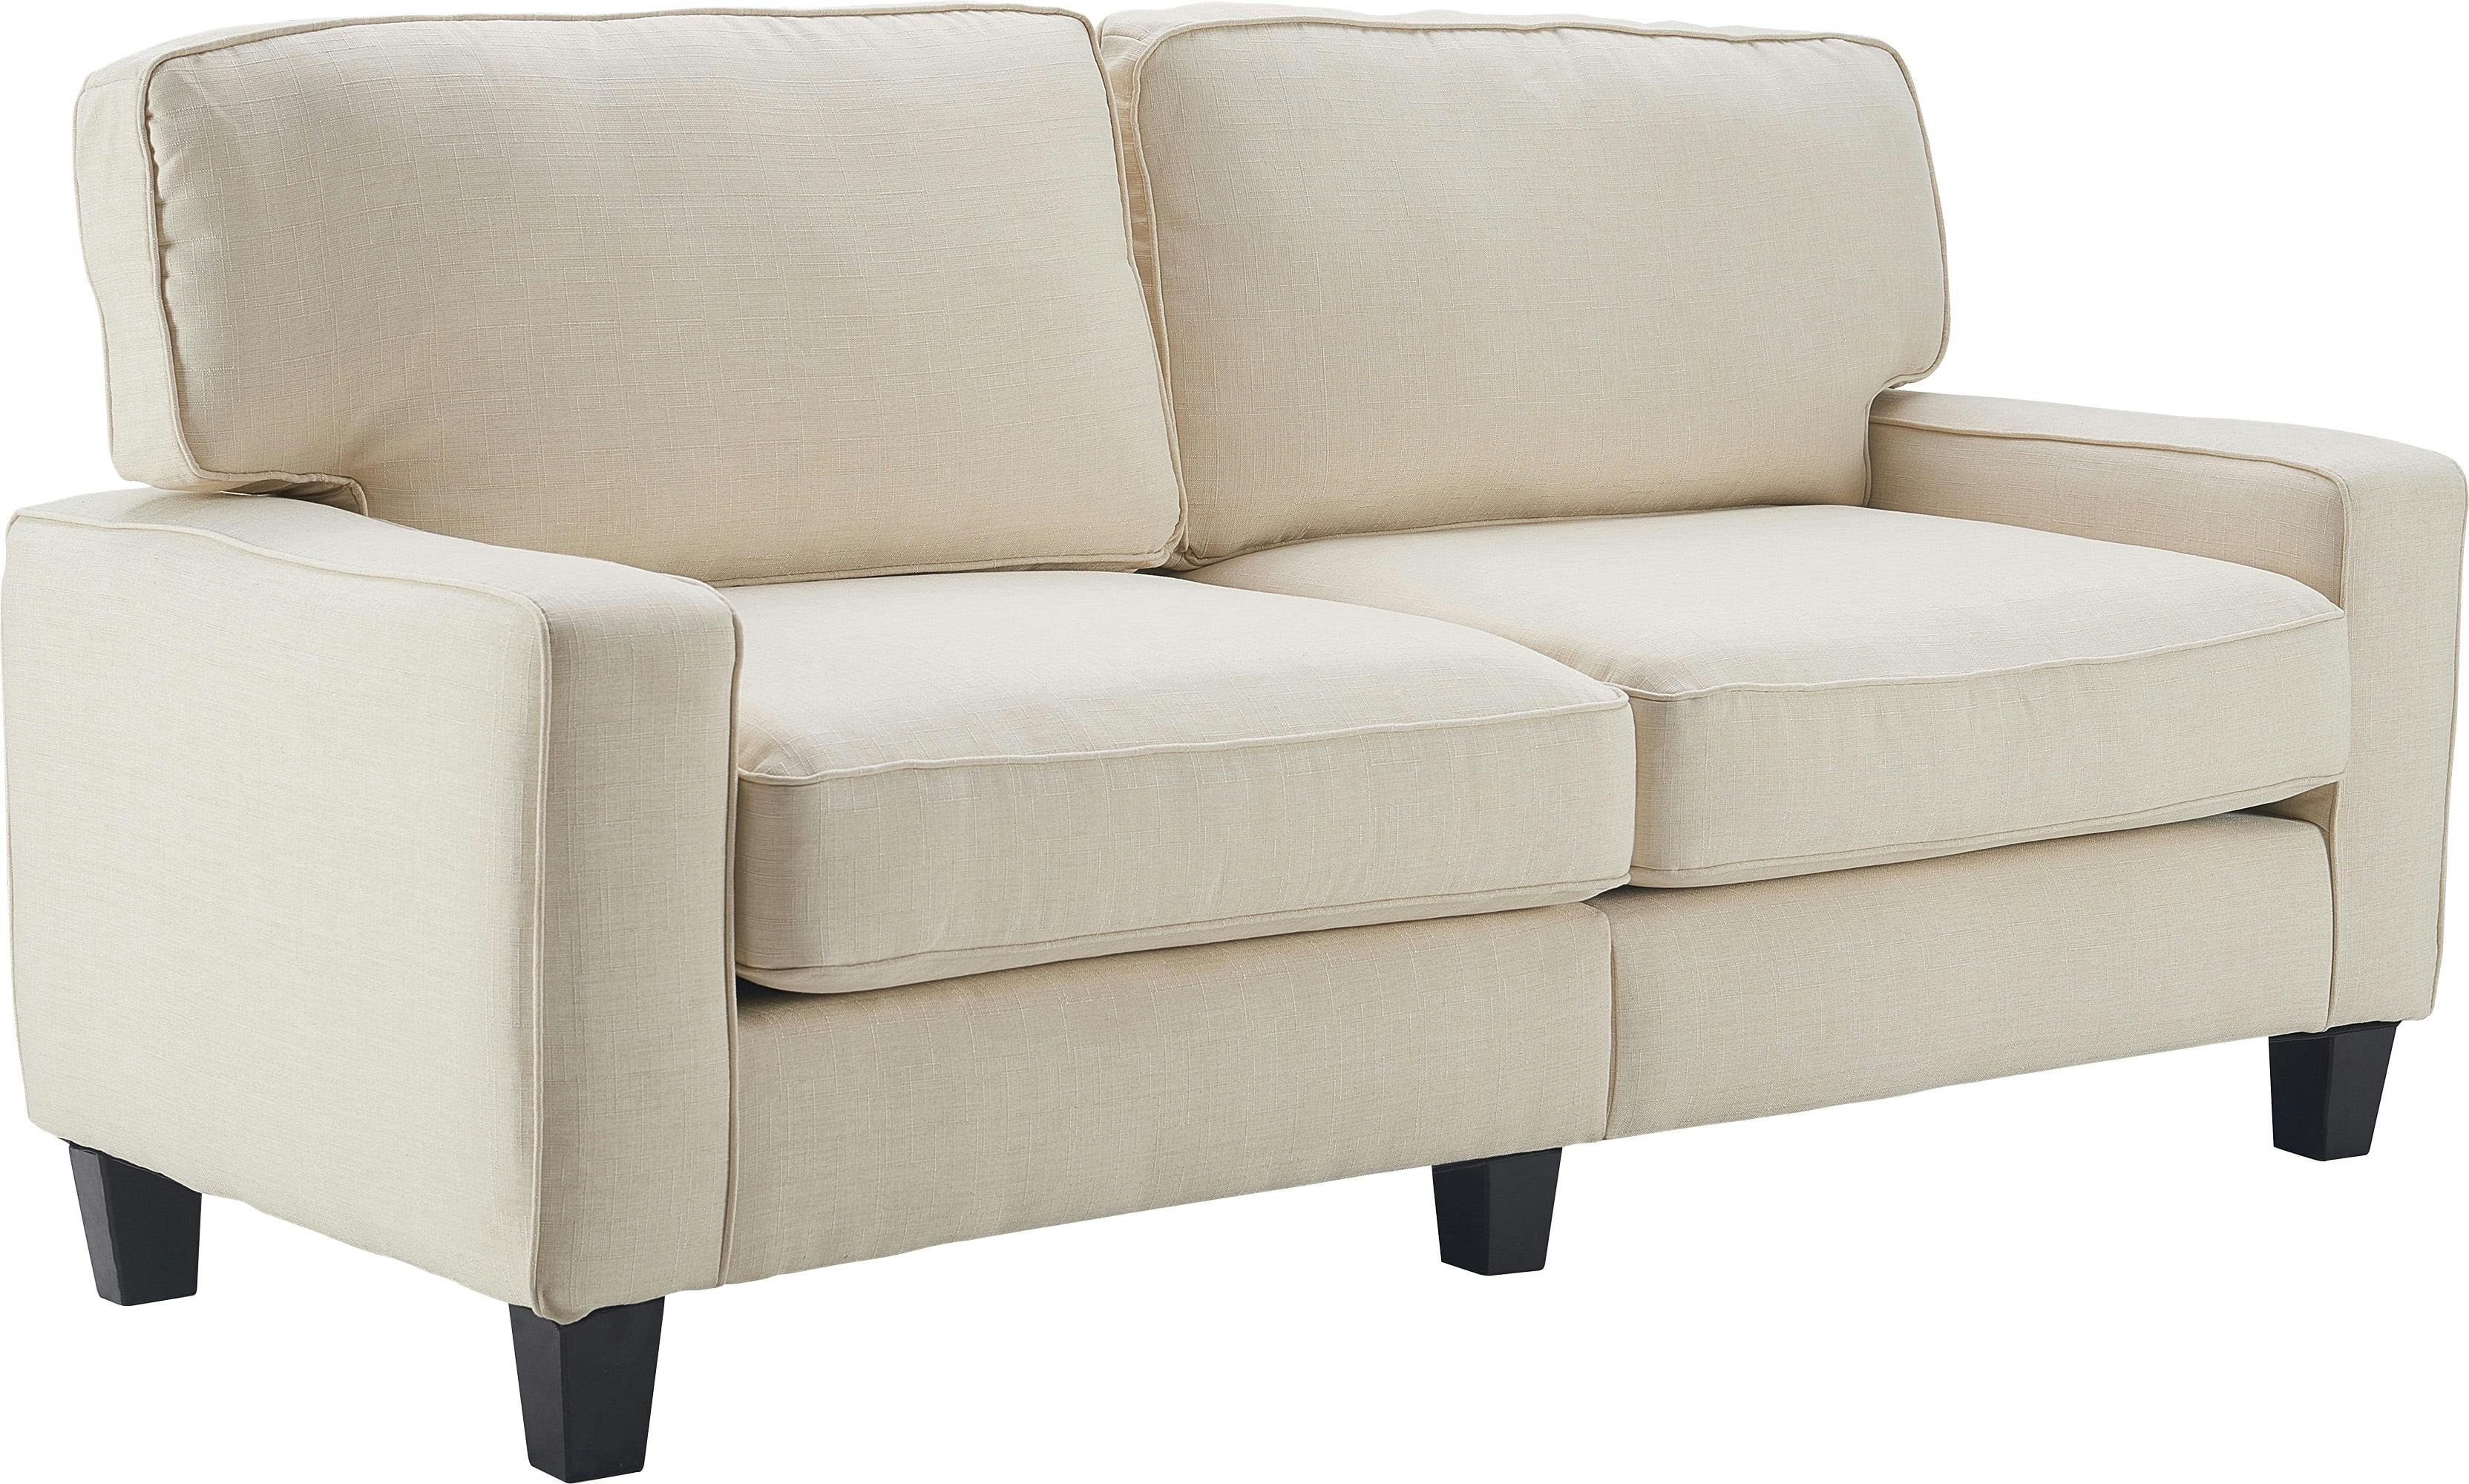 Palisades Light Cream Linen 73" Compact Sofa with Removable Cushions